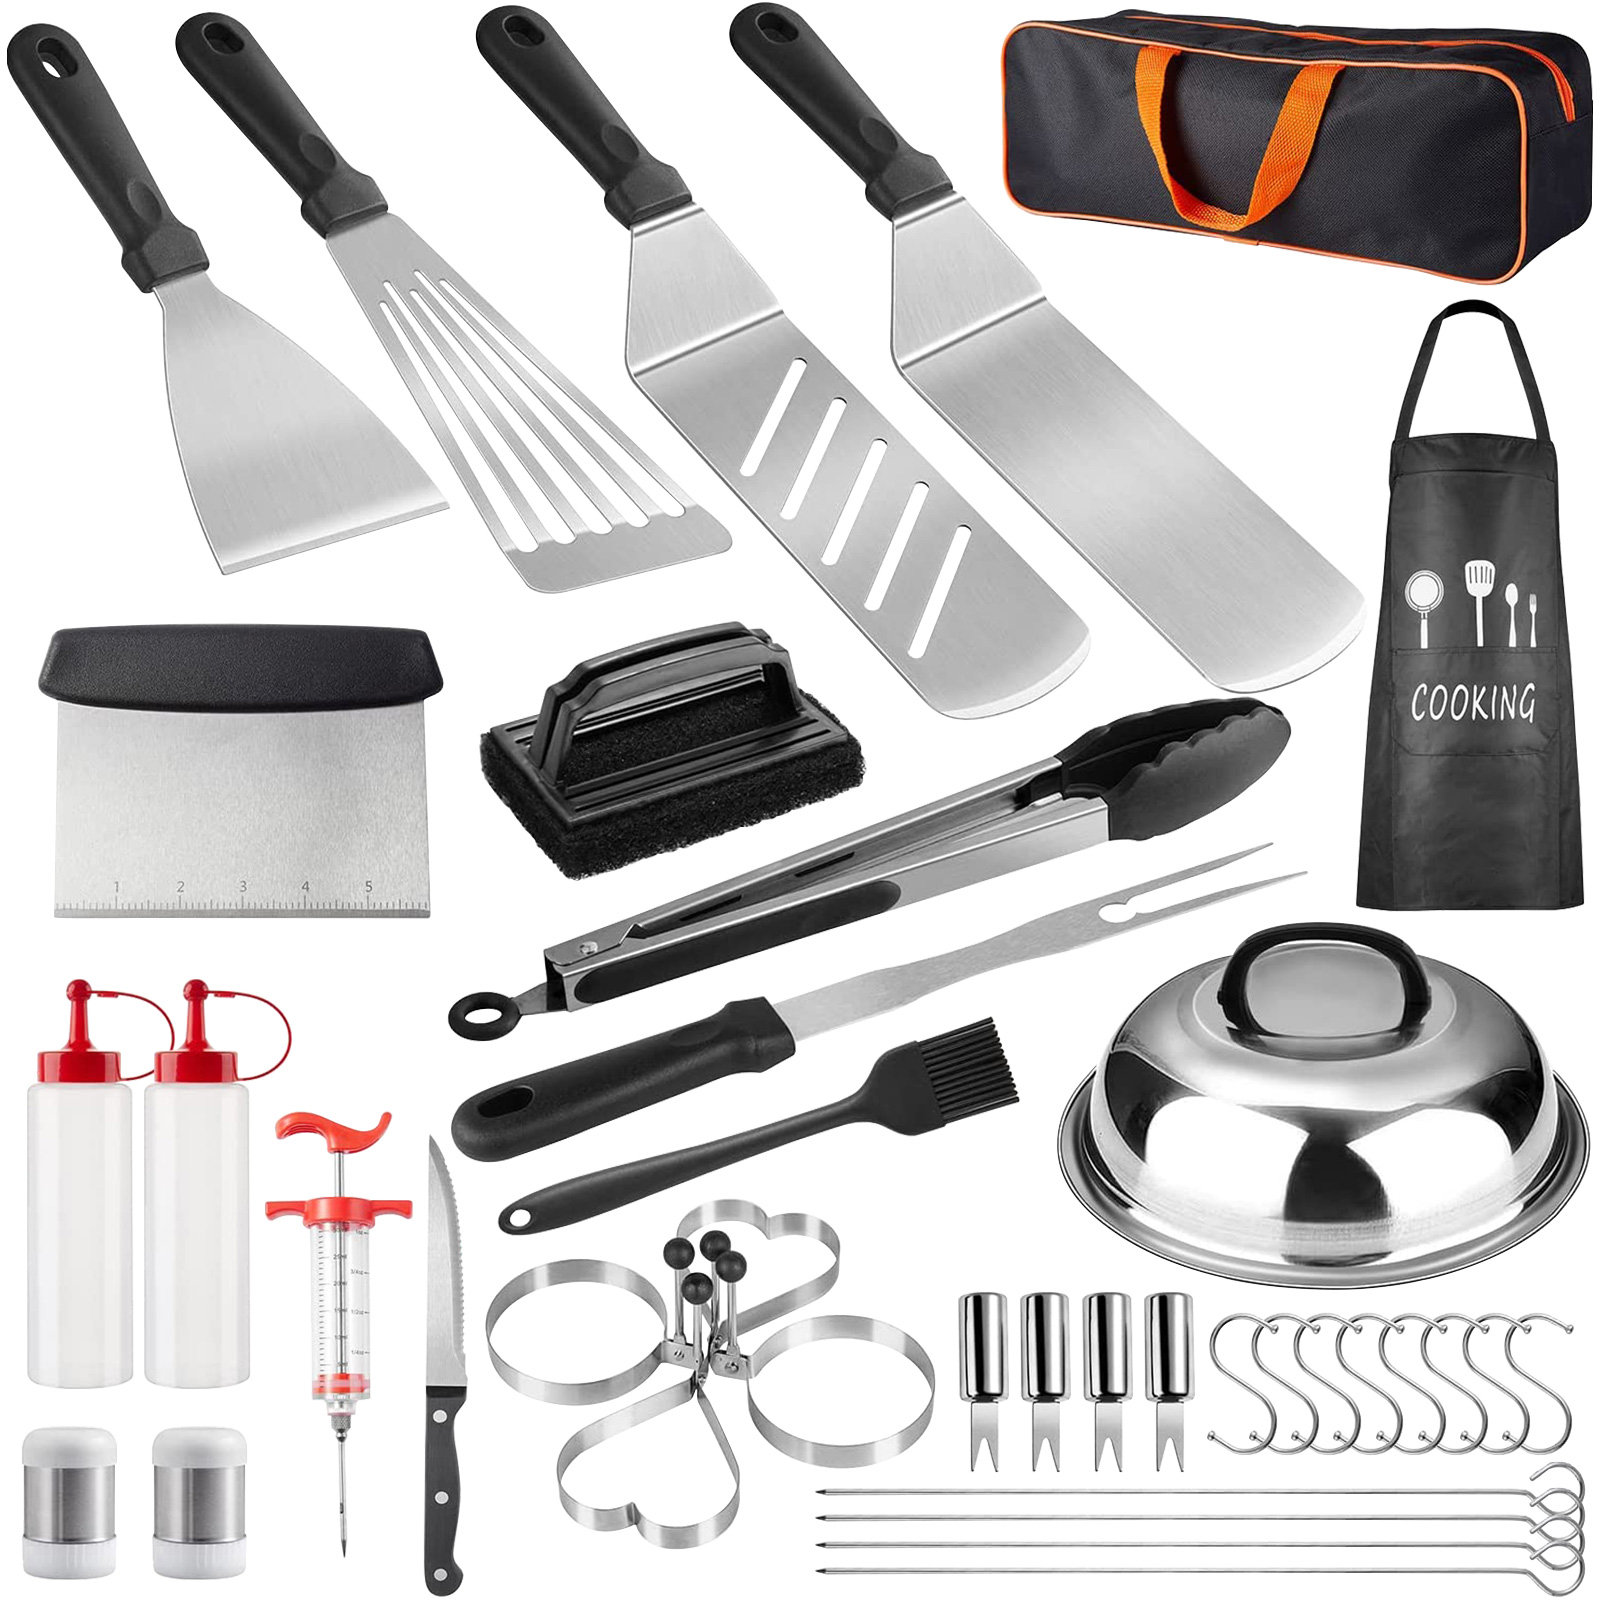 Yukon Glory Heavy Duty 5 Piece Grilling Tools Set, Durable Stainless Steel BBQ A